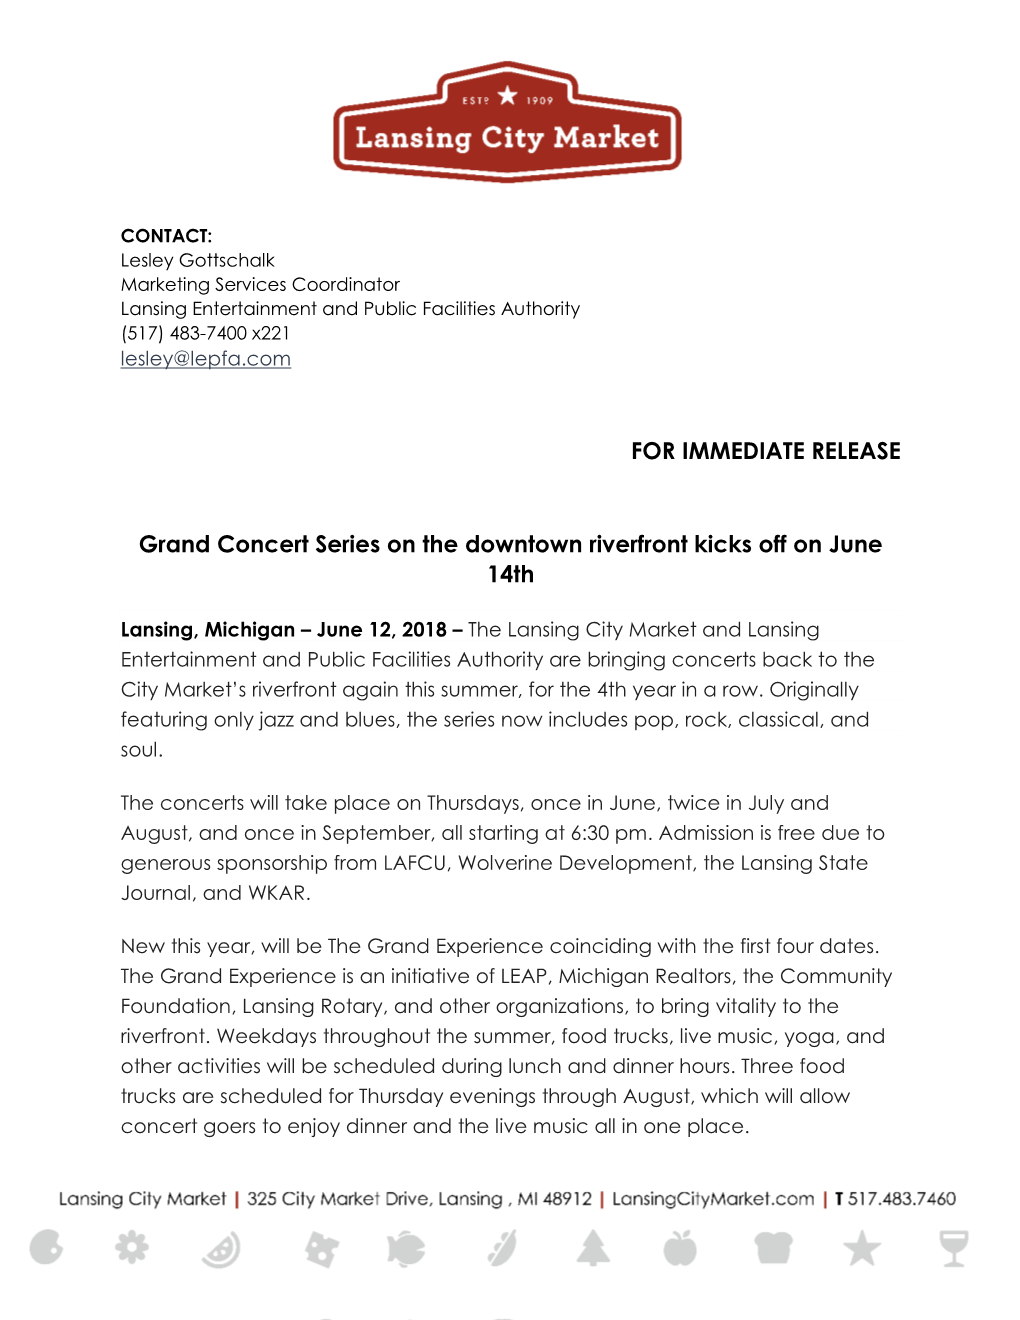 FOR IMMEDIATE RELEASE Grand Concert Series on The